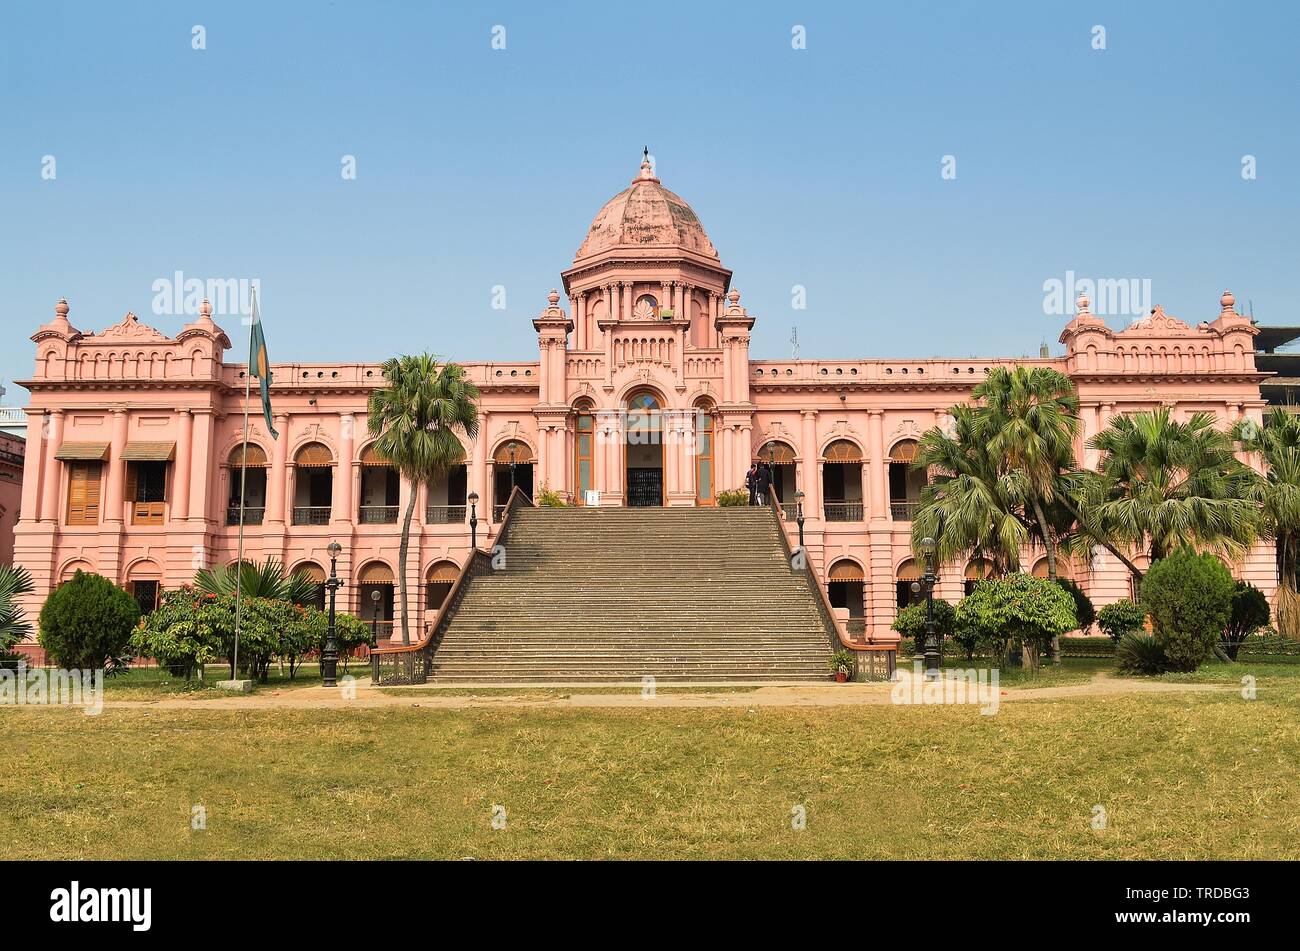 Ahsan Manzil was the official residential palace and seat of the Nawab of Dhaka. The building is situated at Kumartoli along the banks of the Burigang Stock Photo